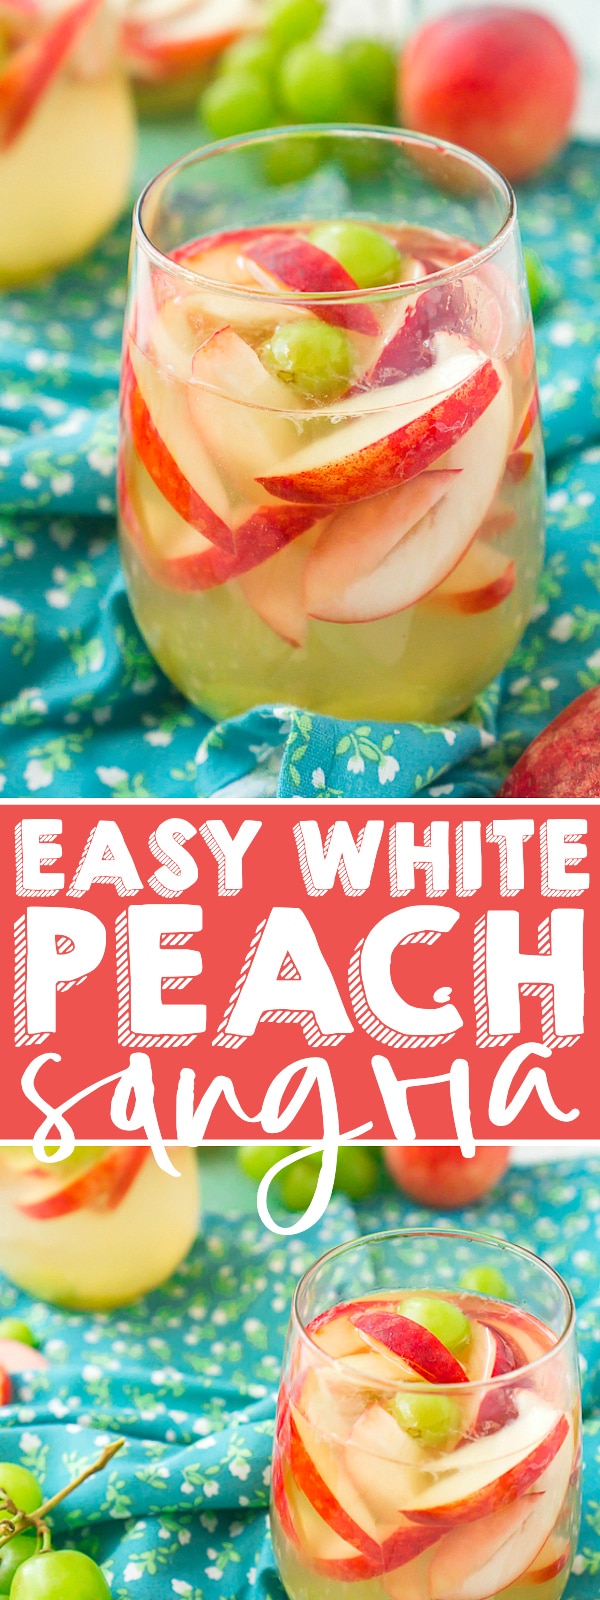 White Peach Sangria is a light but flavorful summer sangria recipe that everyone will love! Sweet, refreshing and super easy to make in under 10 minutes, it's the perfect summer cocktail. | THE LOVE NERDS #winecocktail #summercocktail #peachrecipe